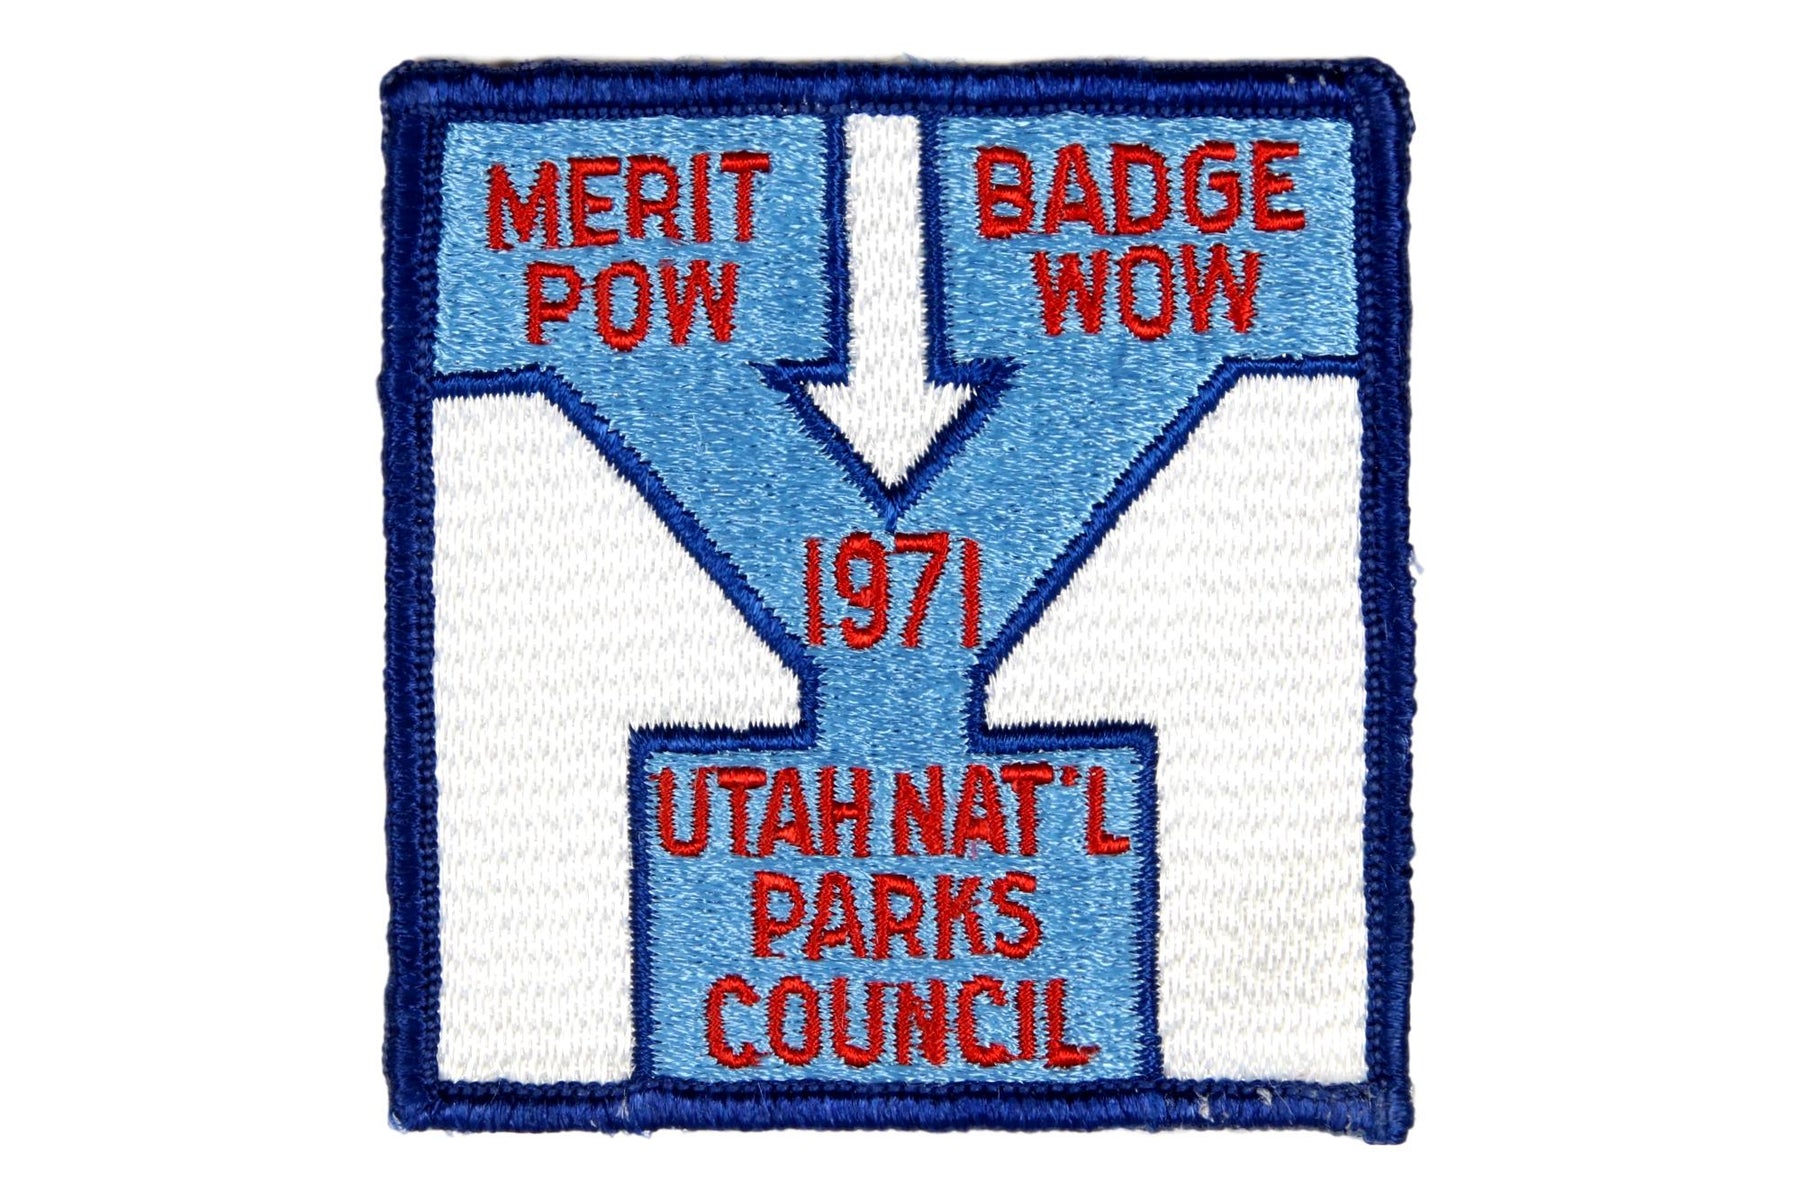 1971 BYU Merit Badge Pow Wow Patch Square